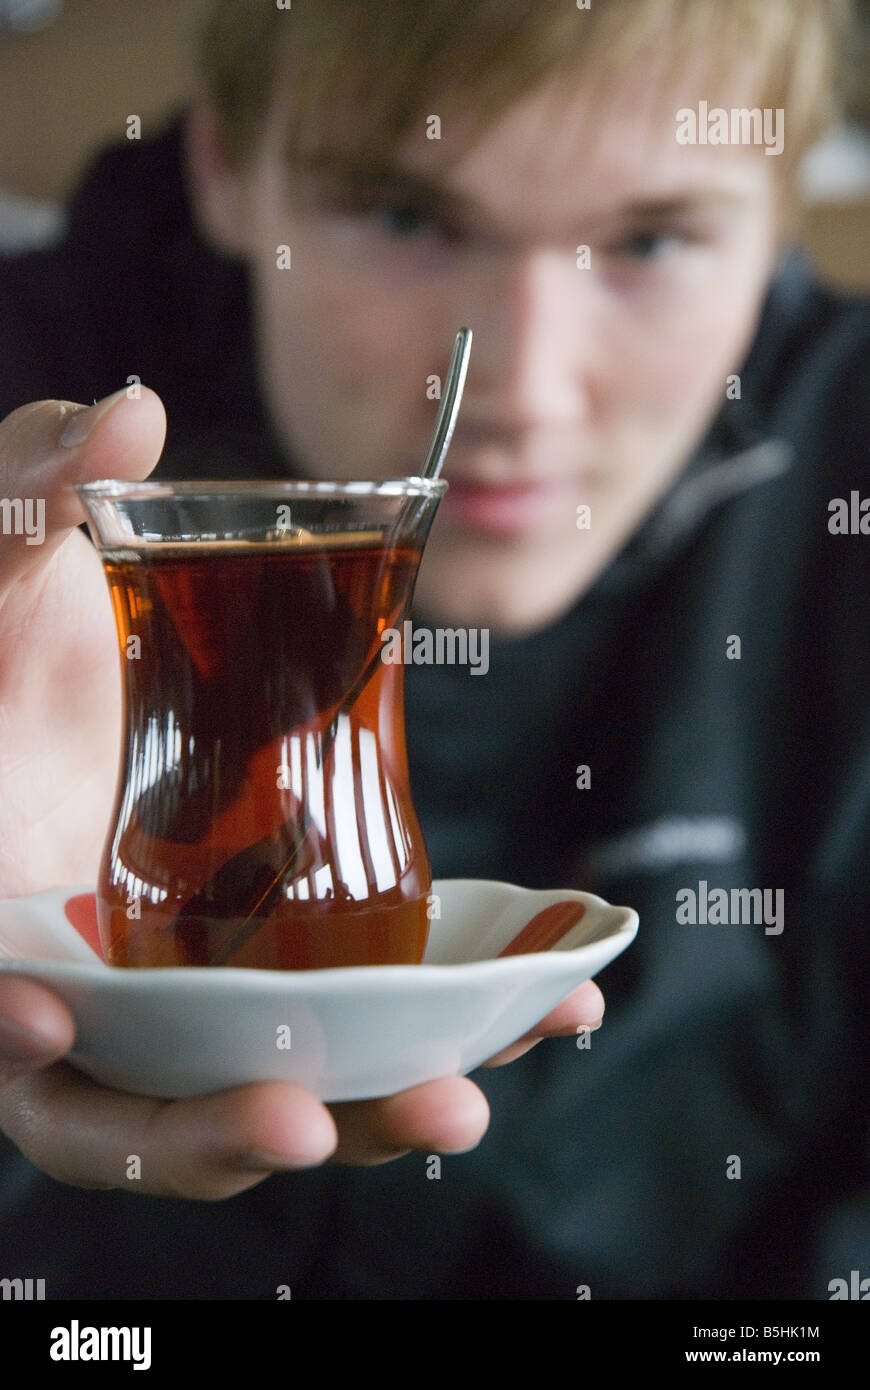 Turkish tea served in a traditional tulip-shaped glass with suacer and sugar cube. Stock Photo